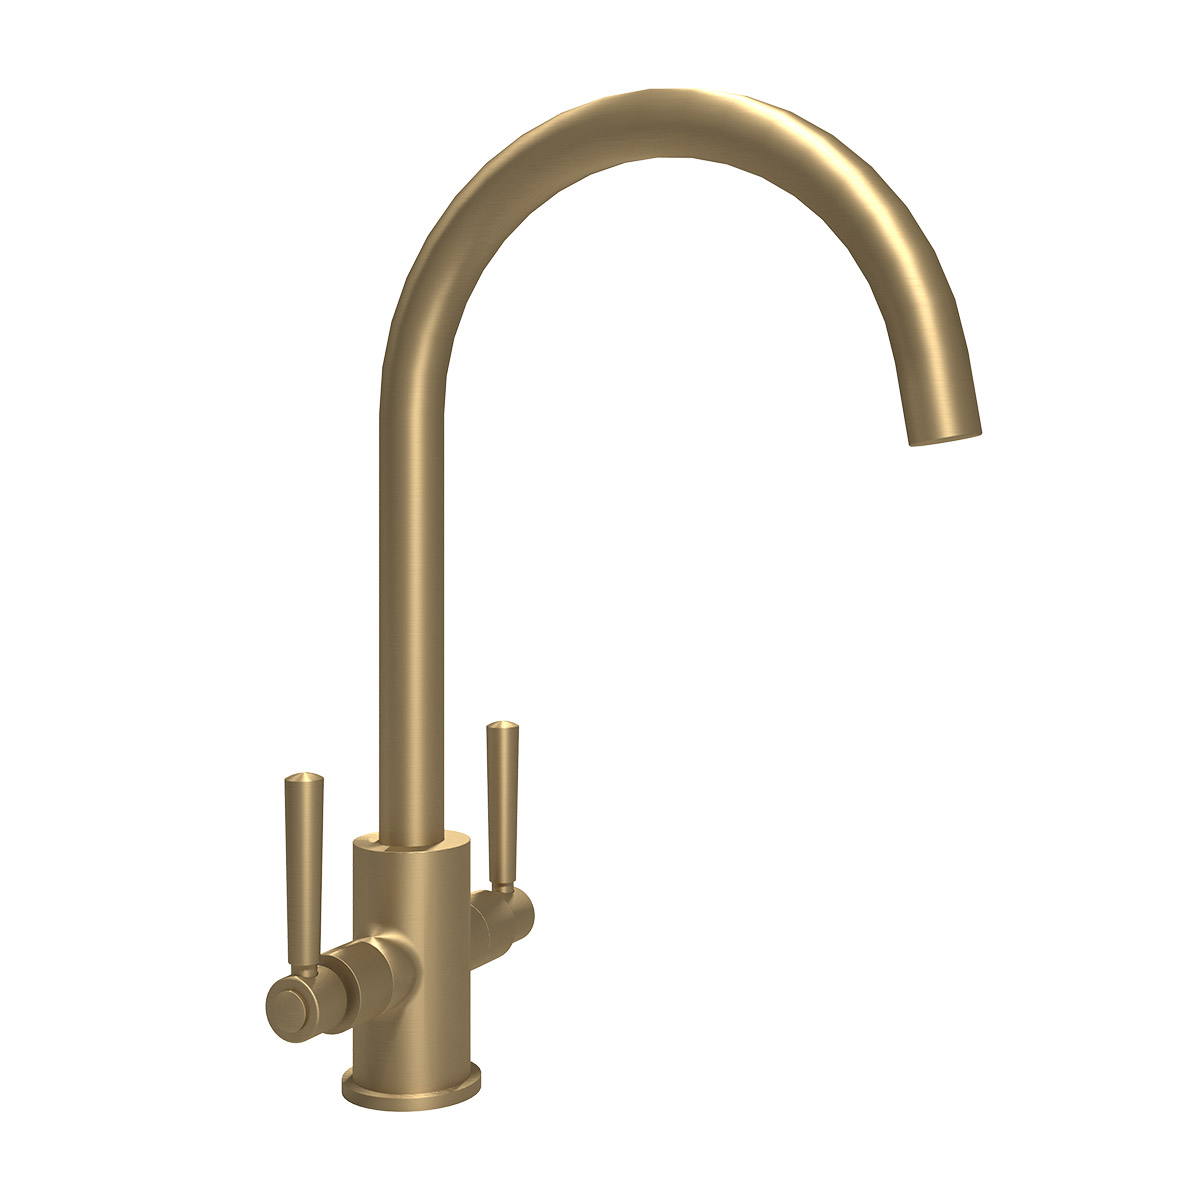 Noa dual lever kitchen tap in brushed brass